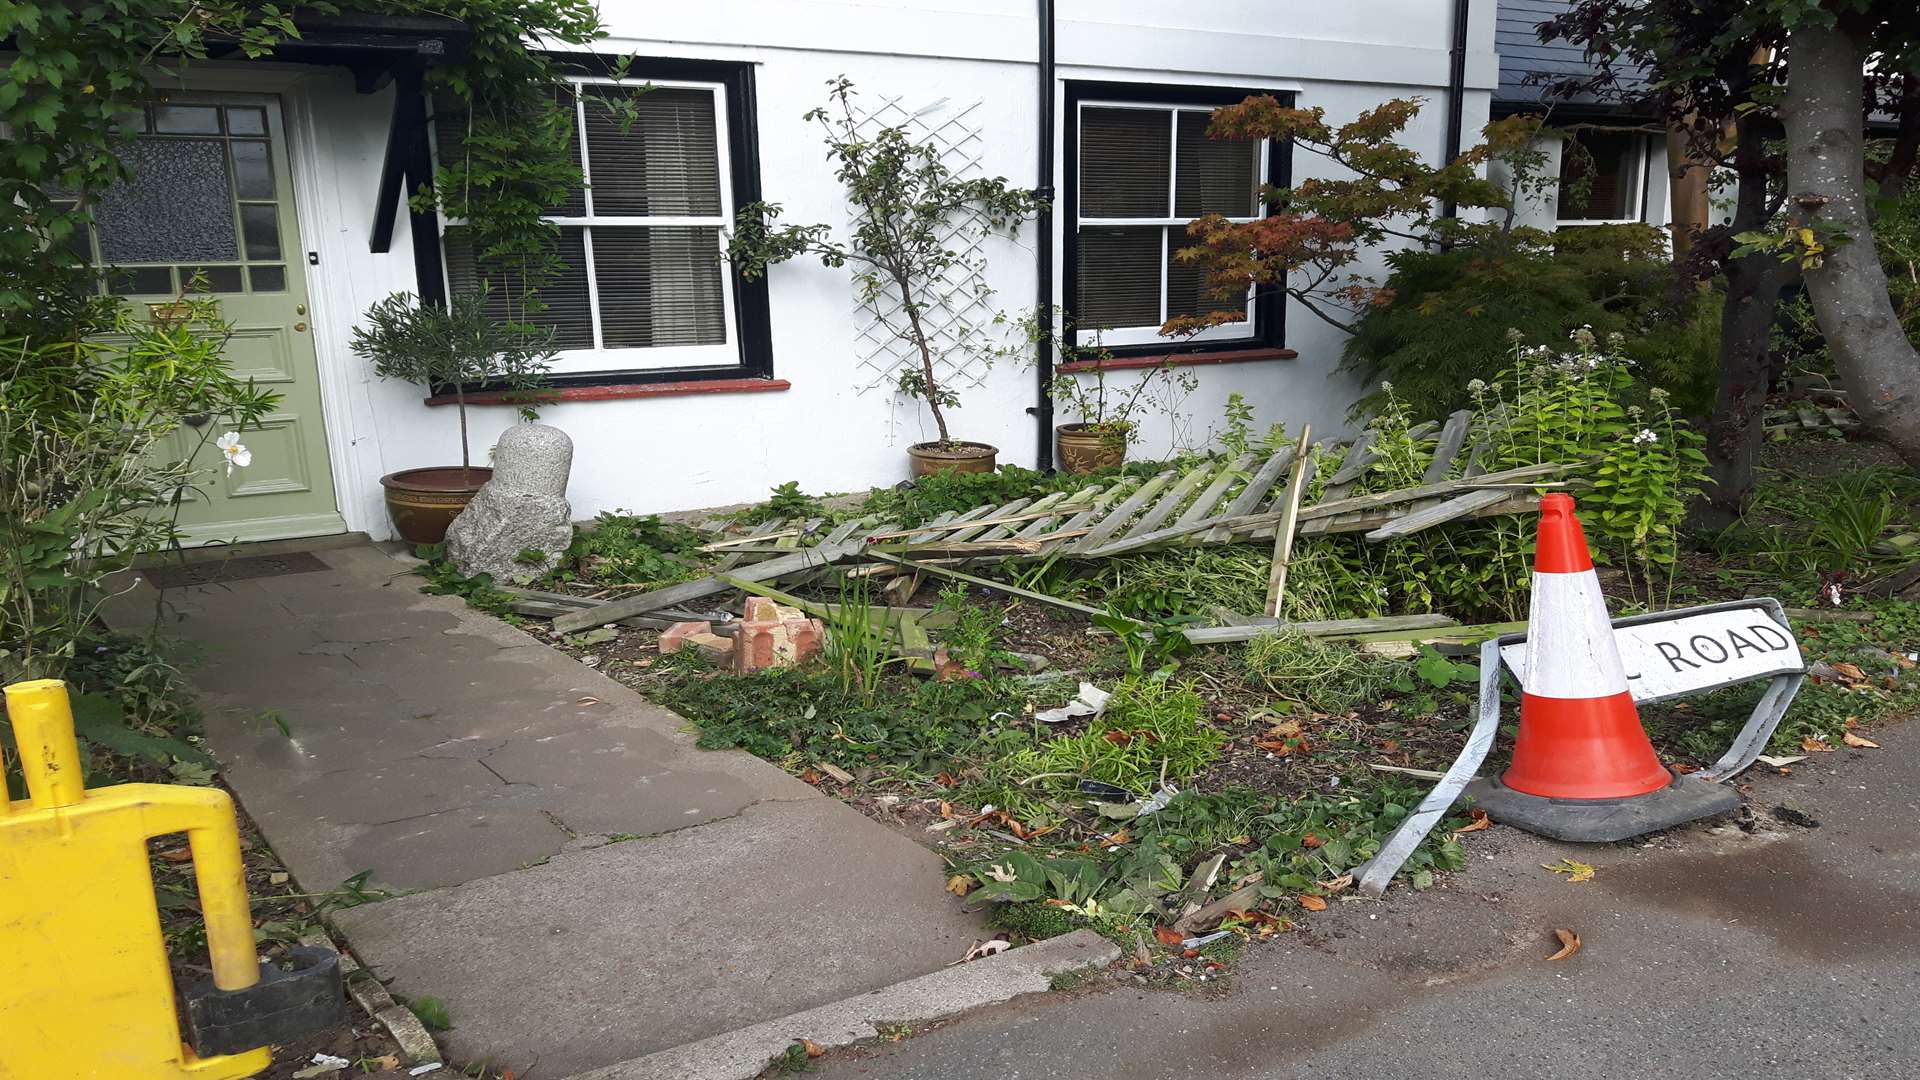 Fence panels are strewn across one front garden